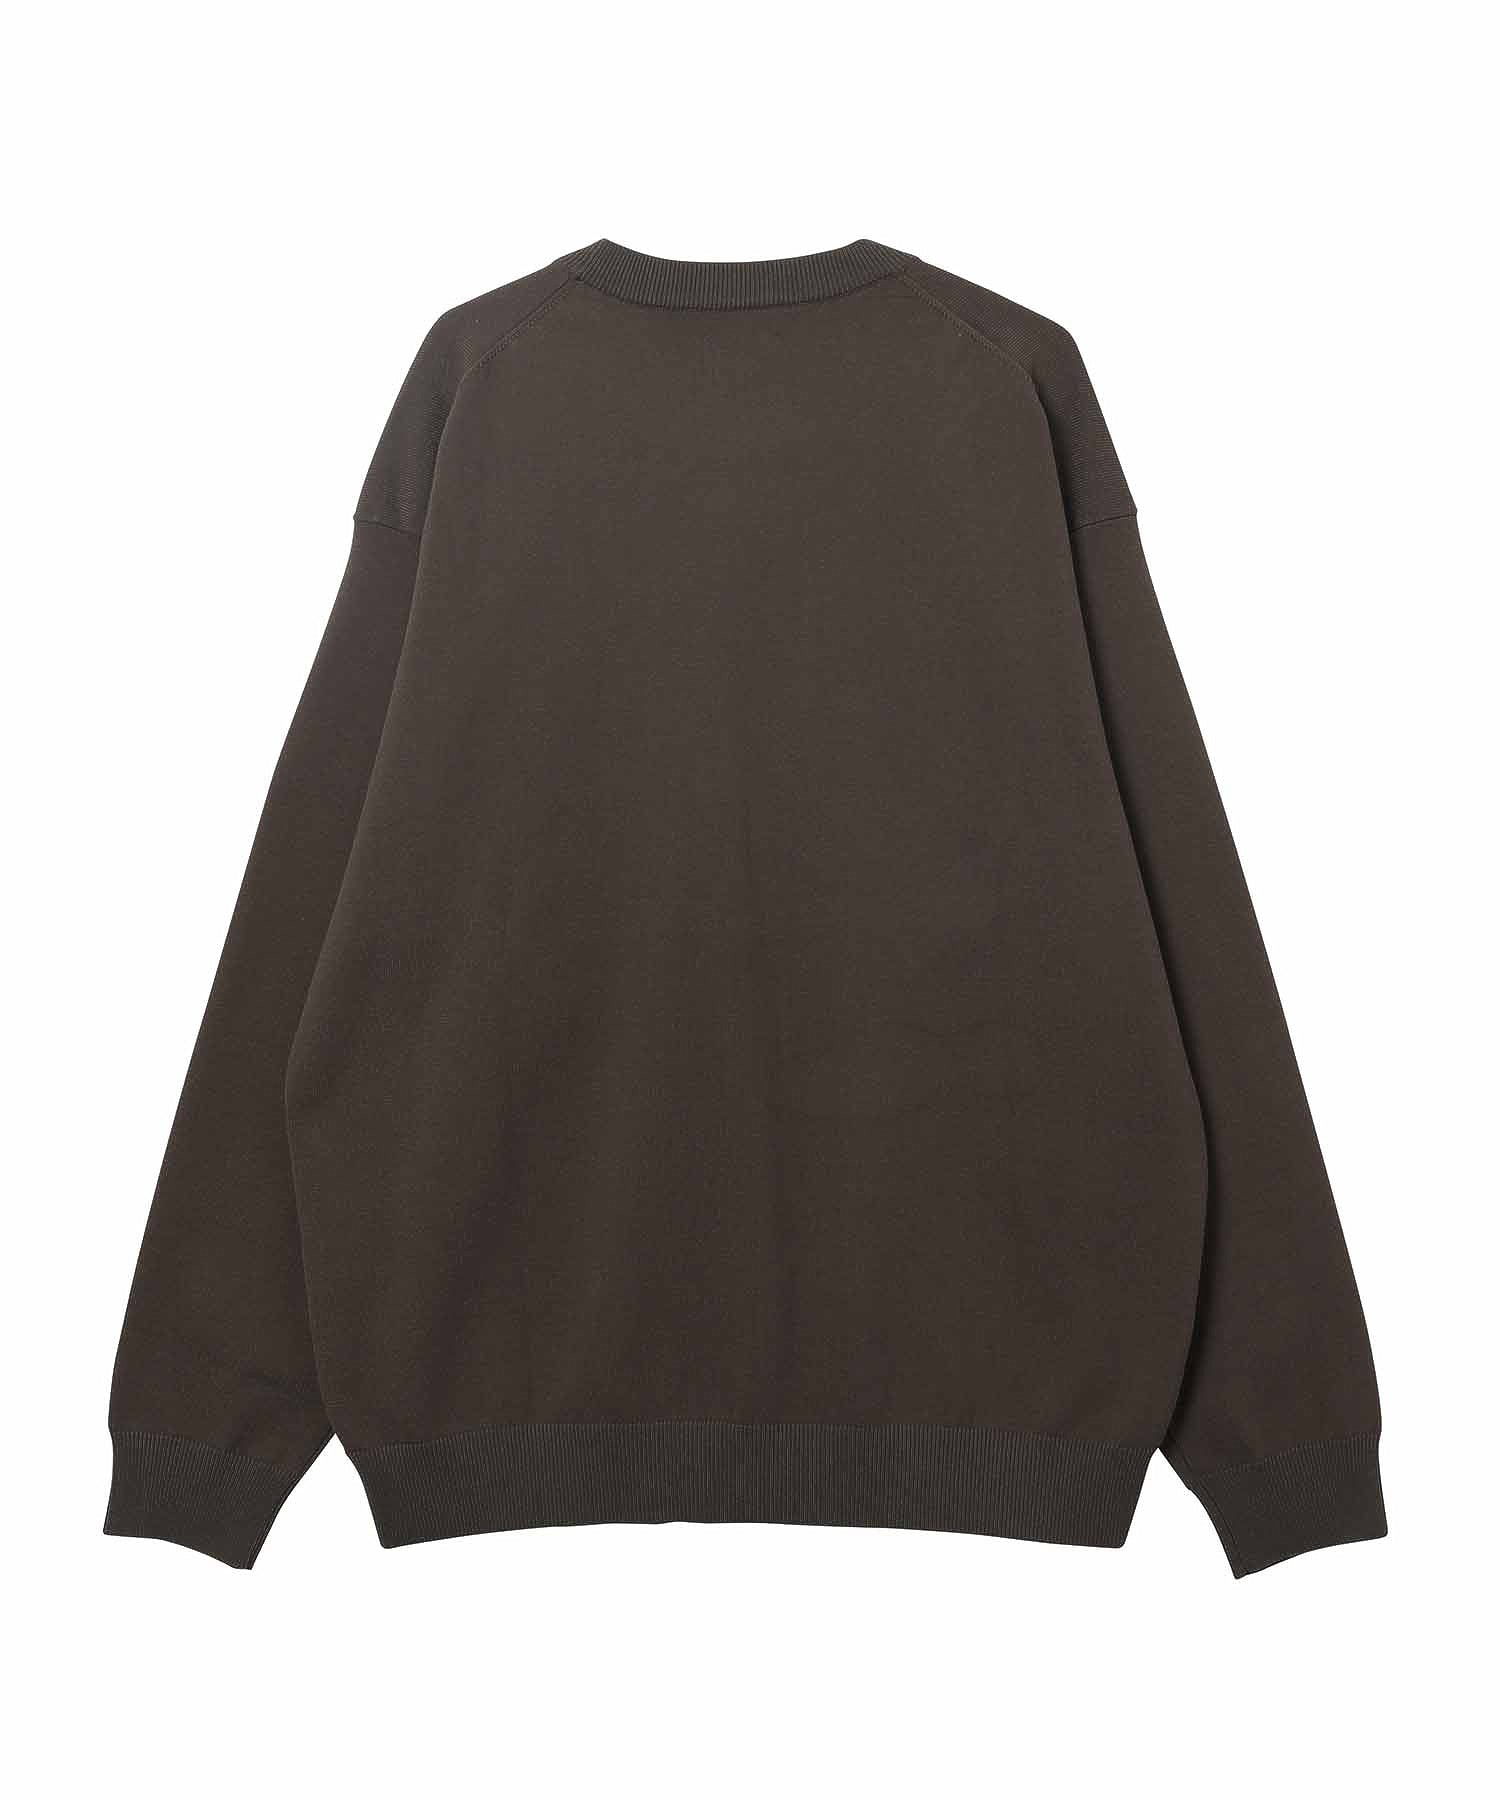 BLUF CAMP /ブルーフキャンプ/ Embroidery-Cotton Sweater BC-1Ｅ-N001